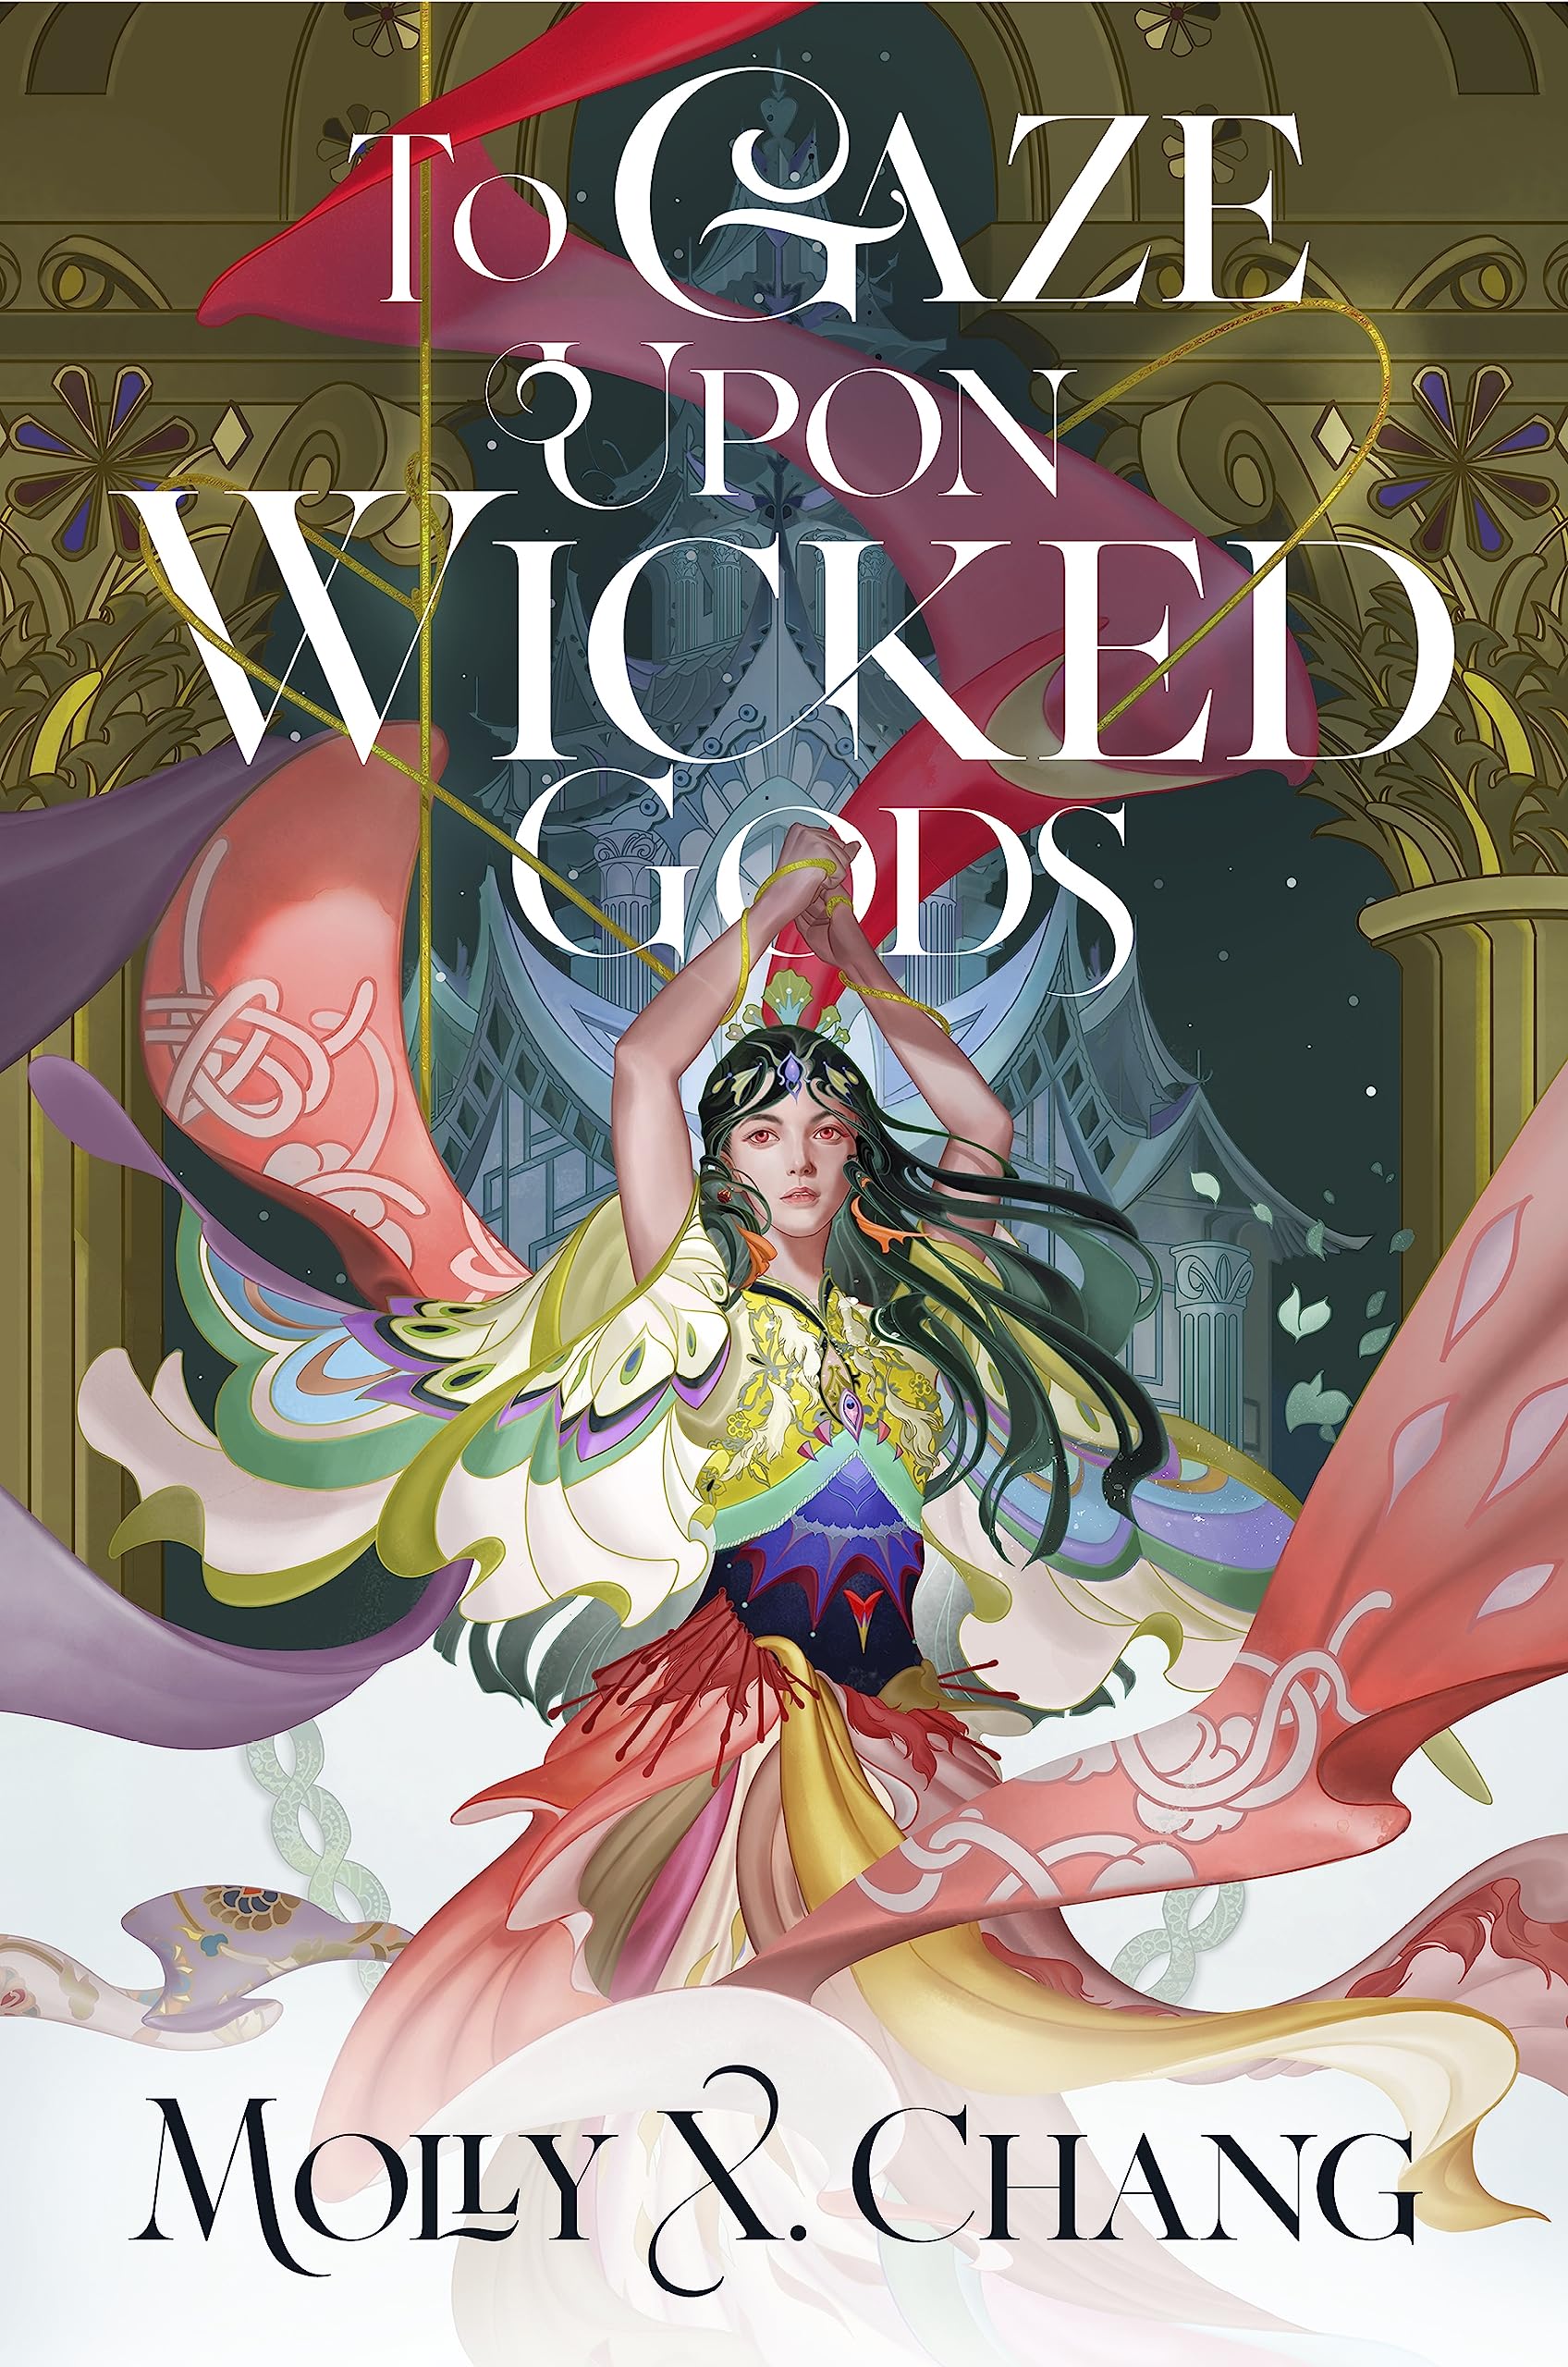 to gaze upon wicked gods by molly x chang book cover